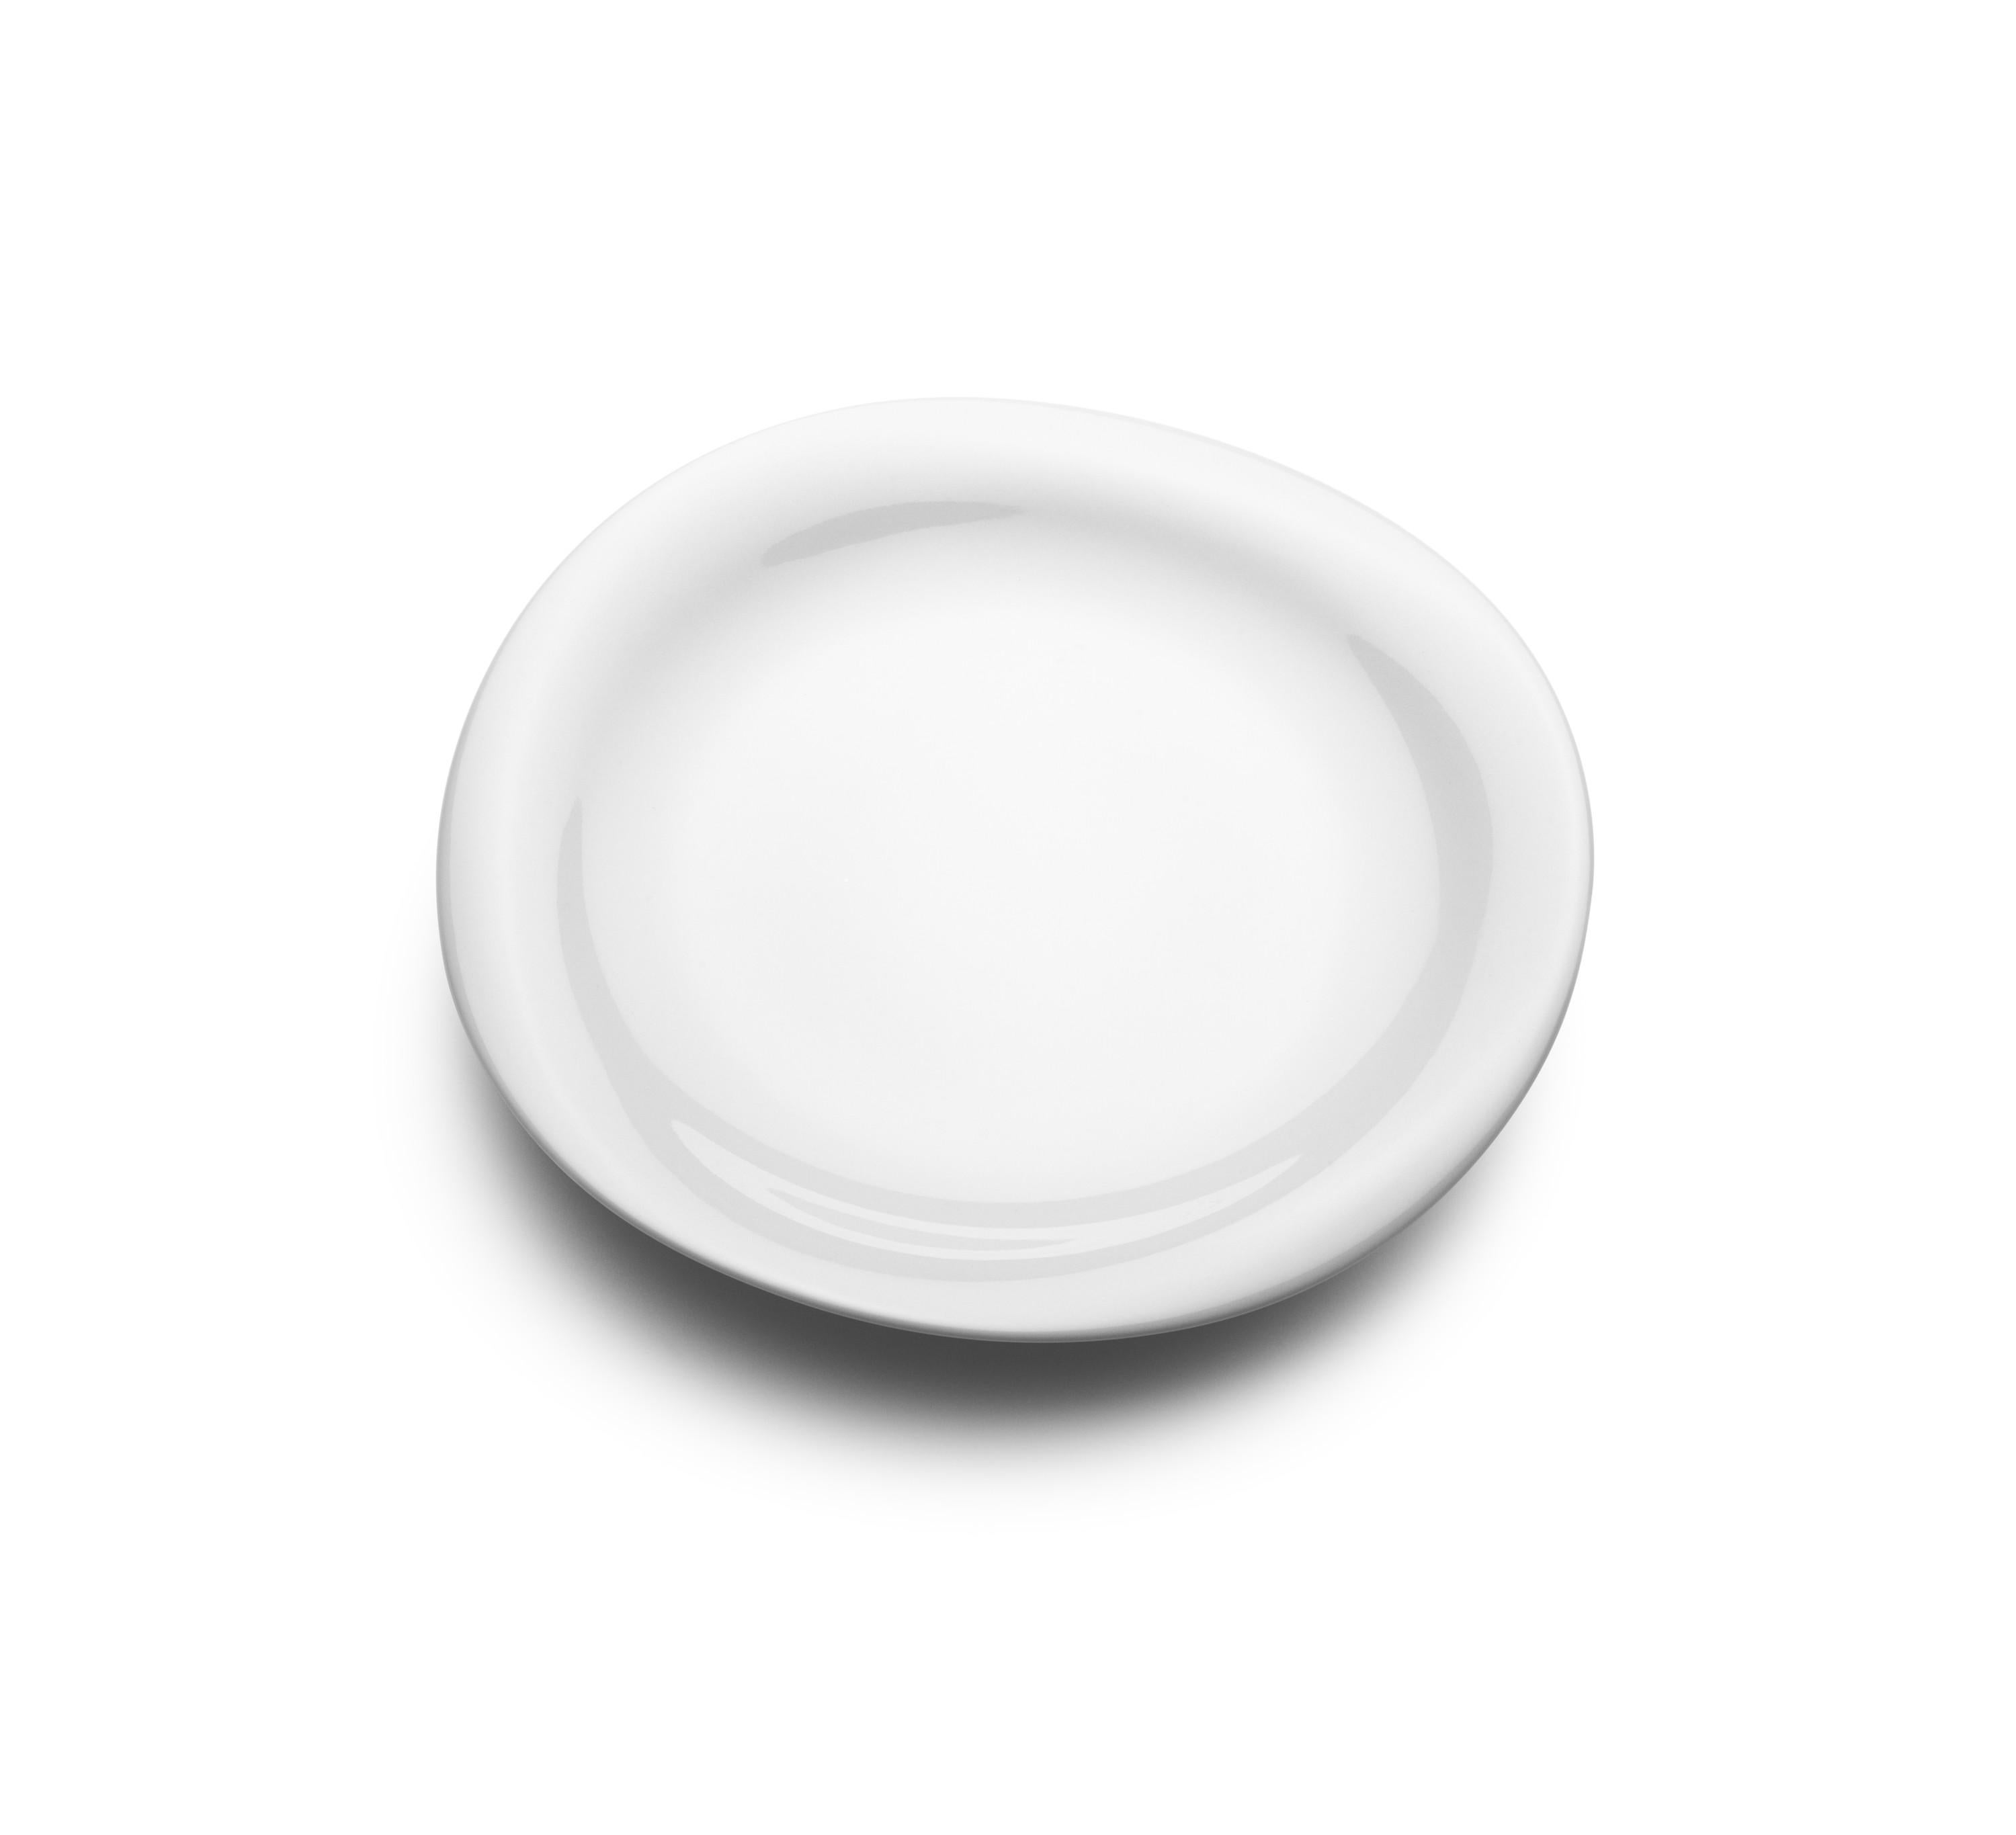 The fluidity of the organic, uneven shape of this plate contrasts beautifully with the clean crisp porcelain, glazed in pure white. Medium in size, the plate is perfect for lunches or appetizer courses and can be part of a larger service comprising